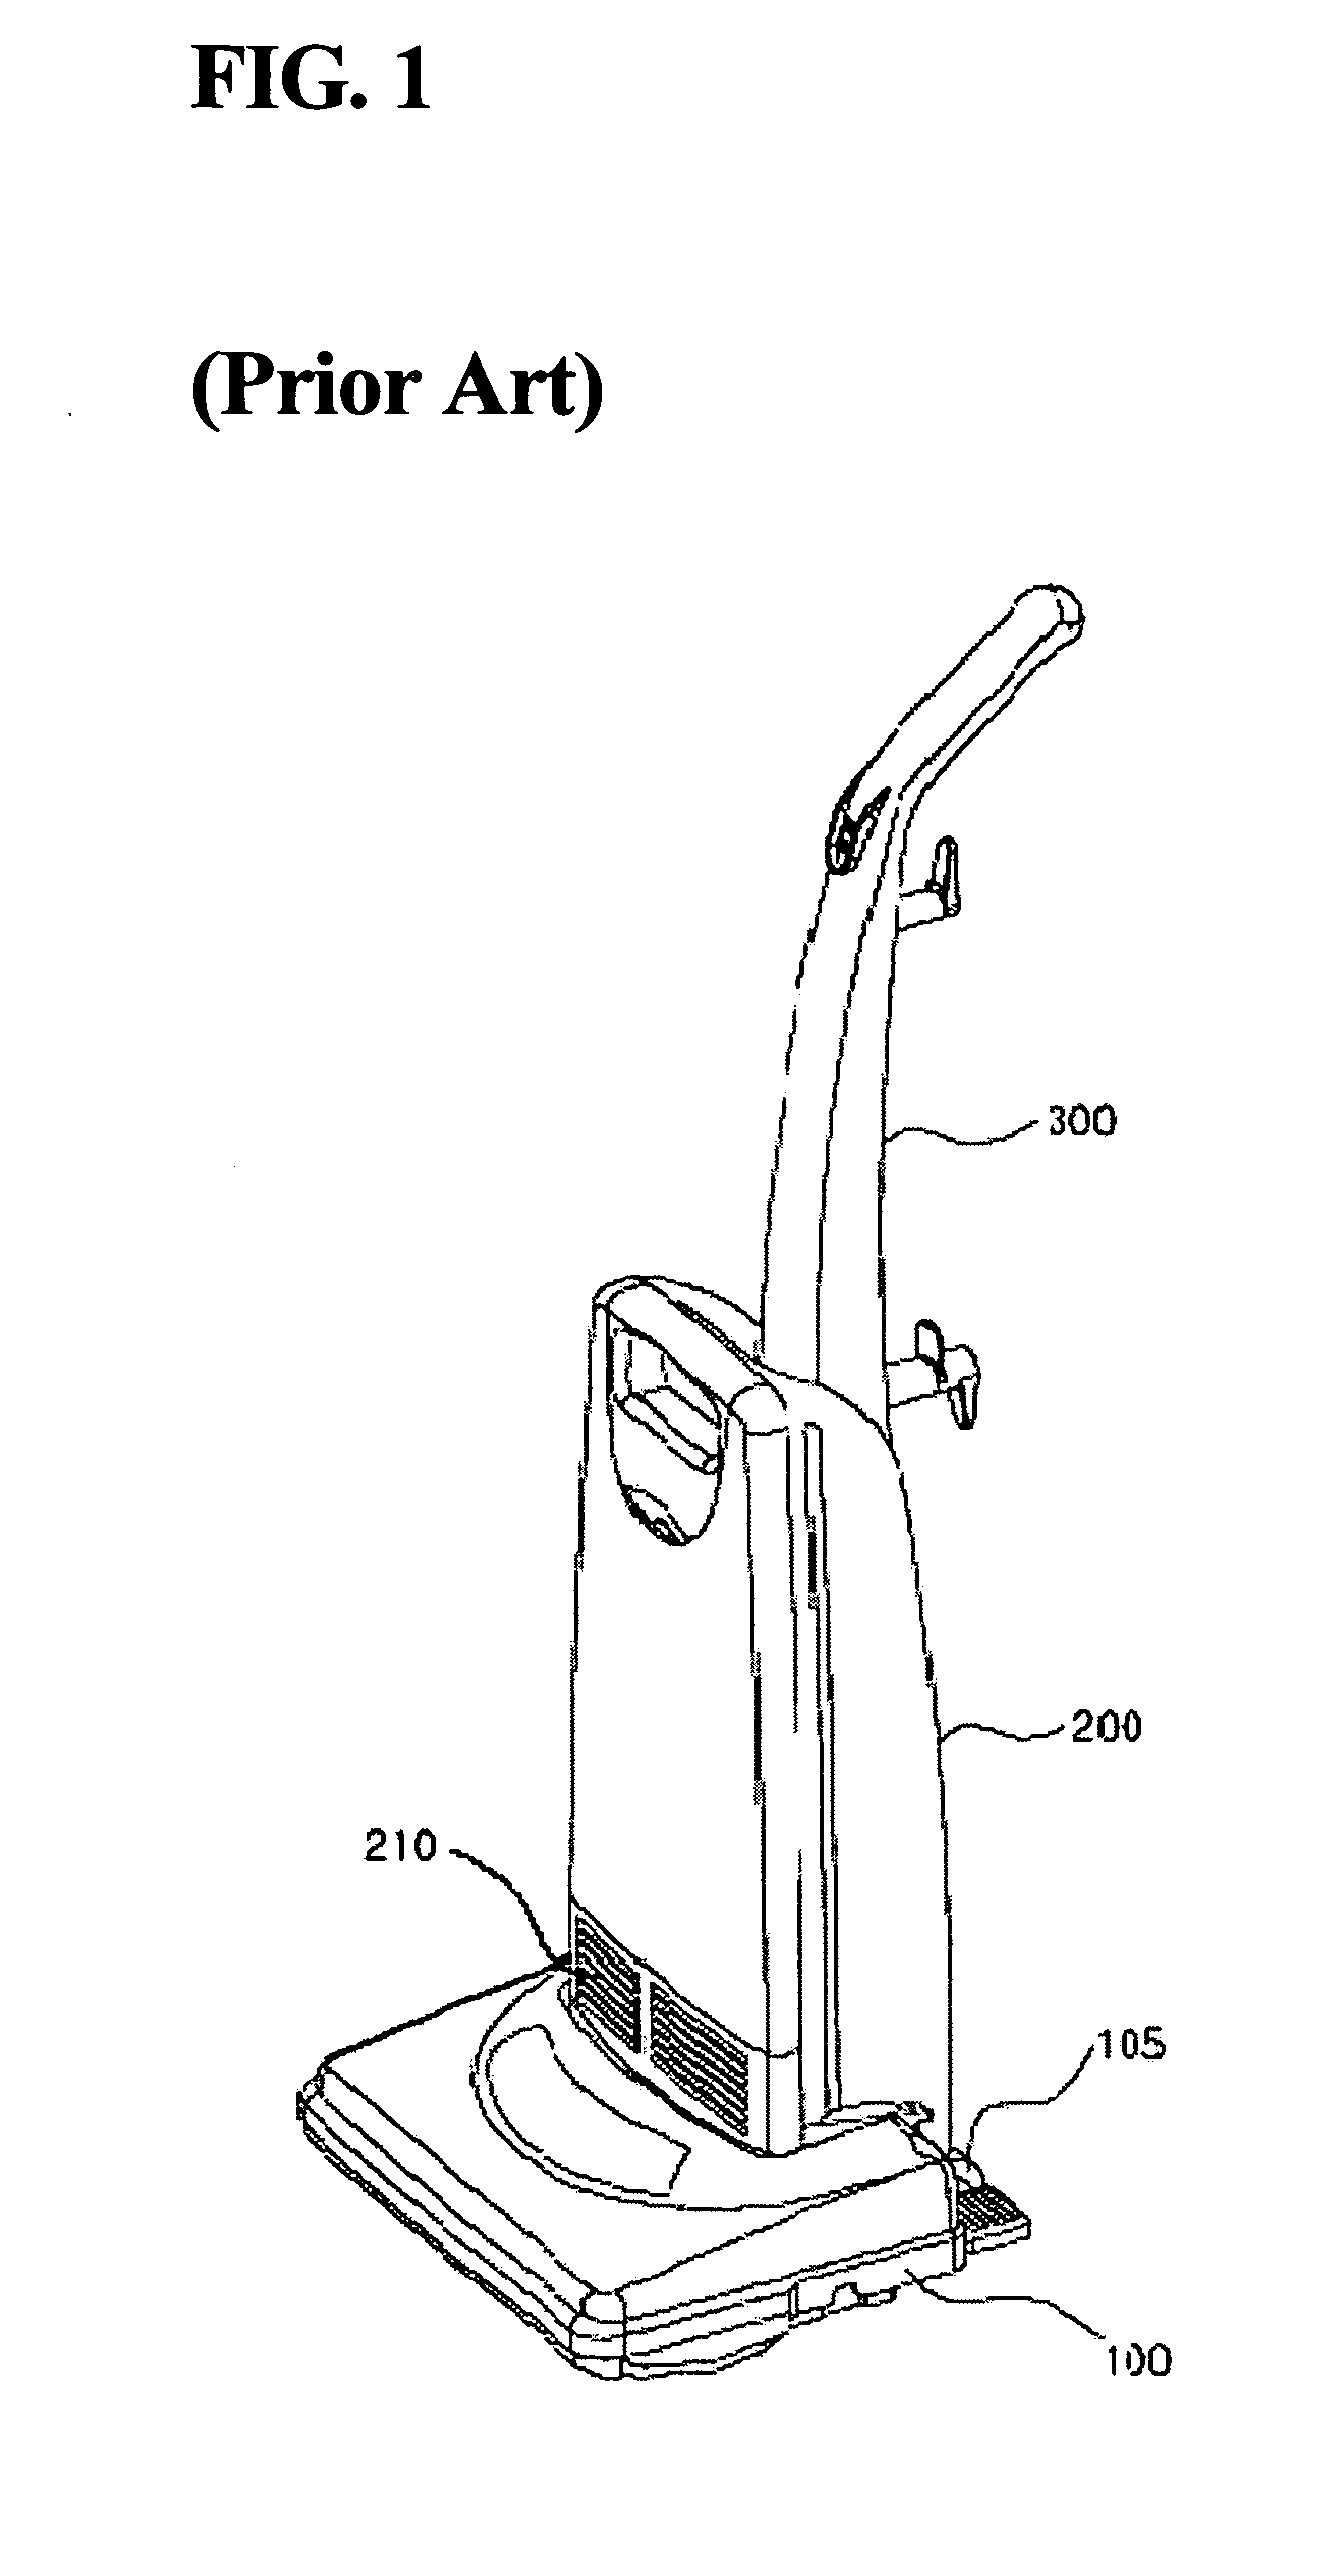 Main body mounting structure of upright type vacuum cleaner capable of being converted to canister type